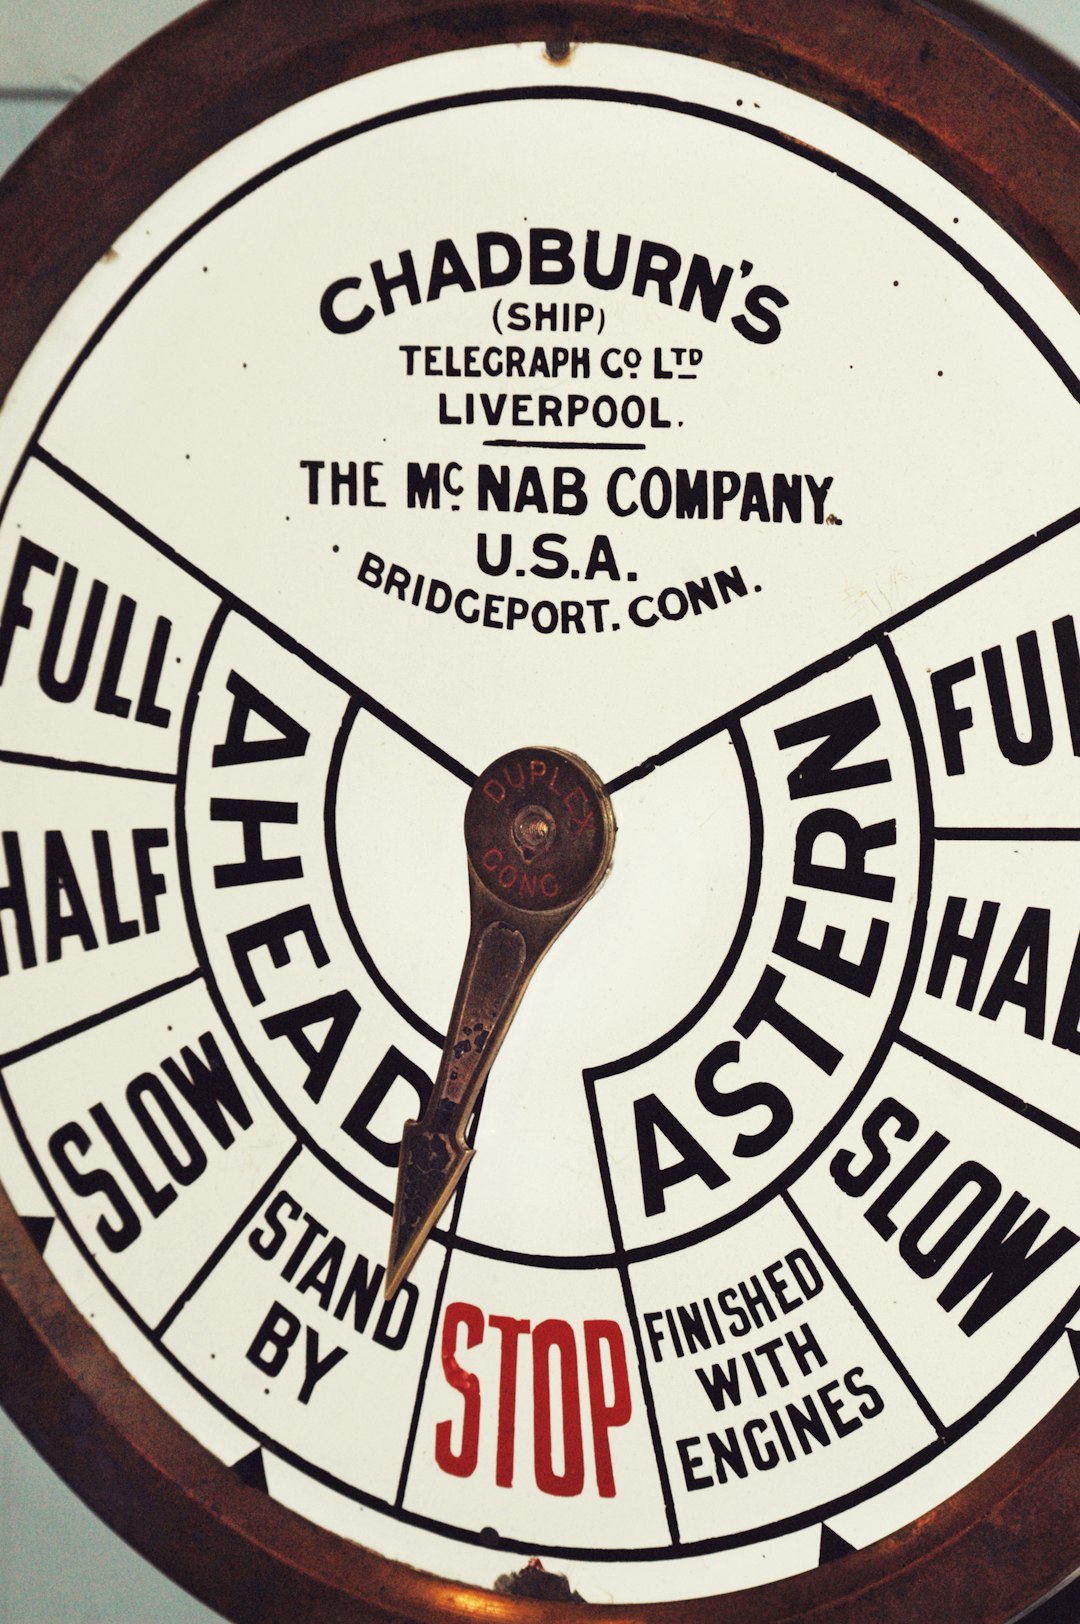 Detail shot of a ship or vessel's propulsion system, filled with large text print and words giving speed readouts. Patina covers the metal round dial and needle.